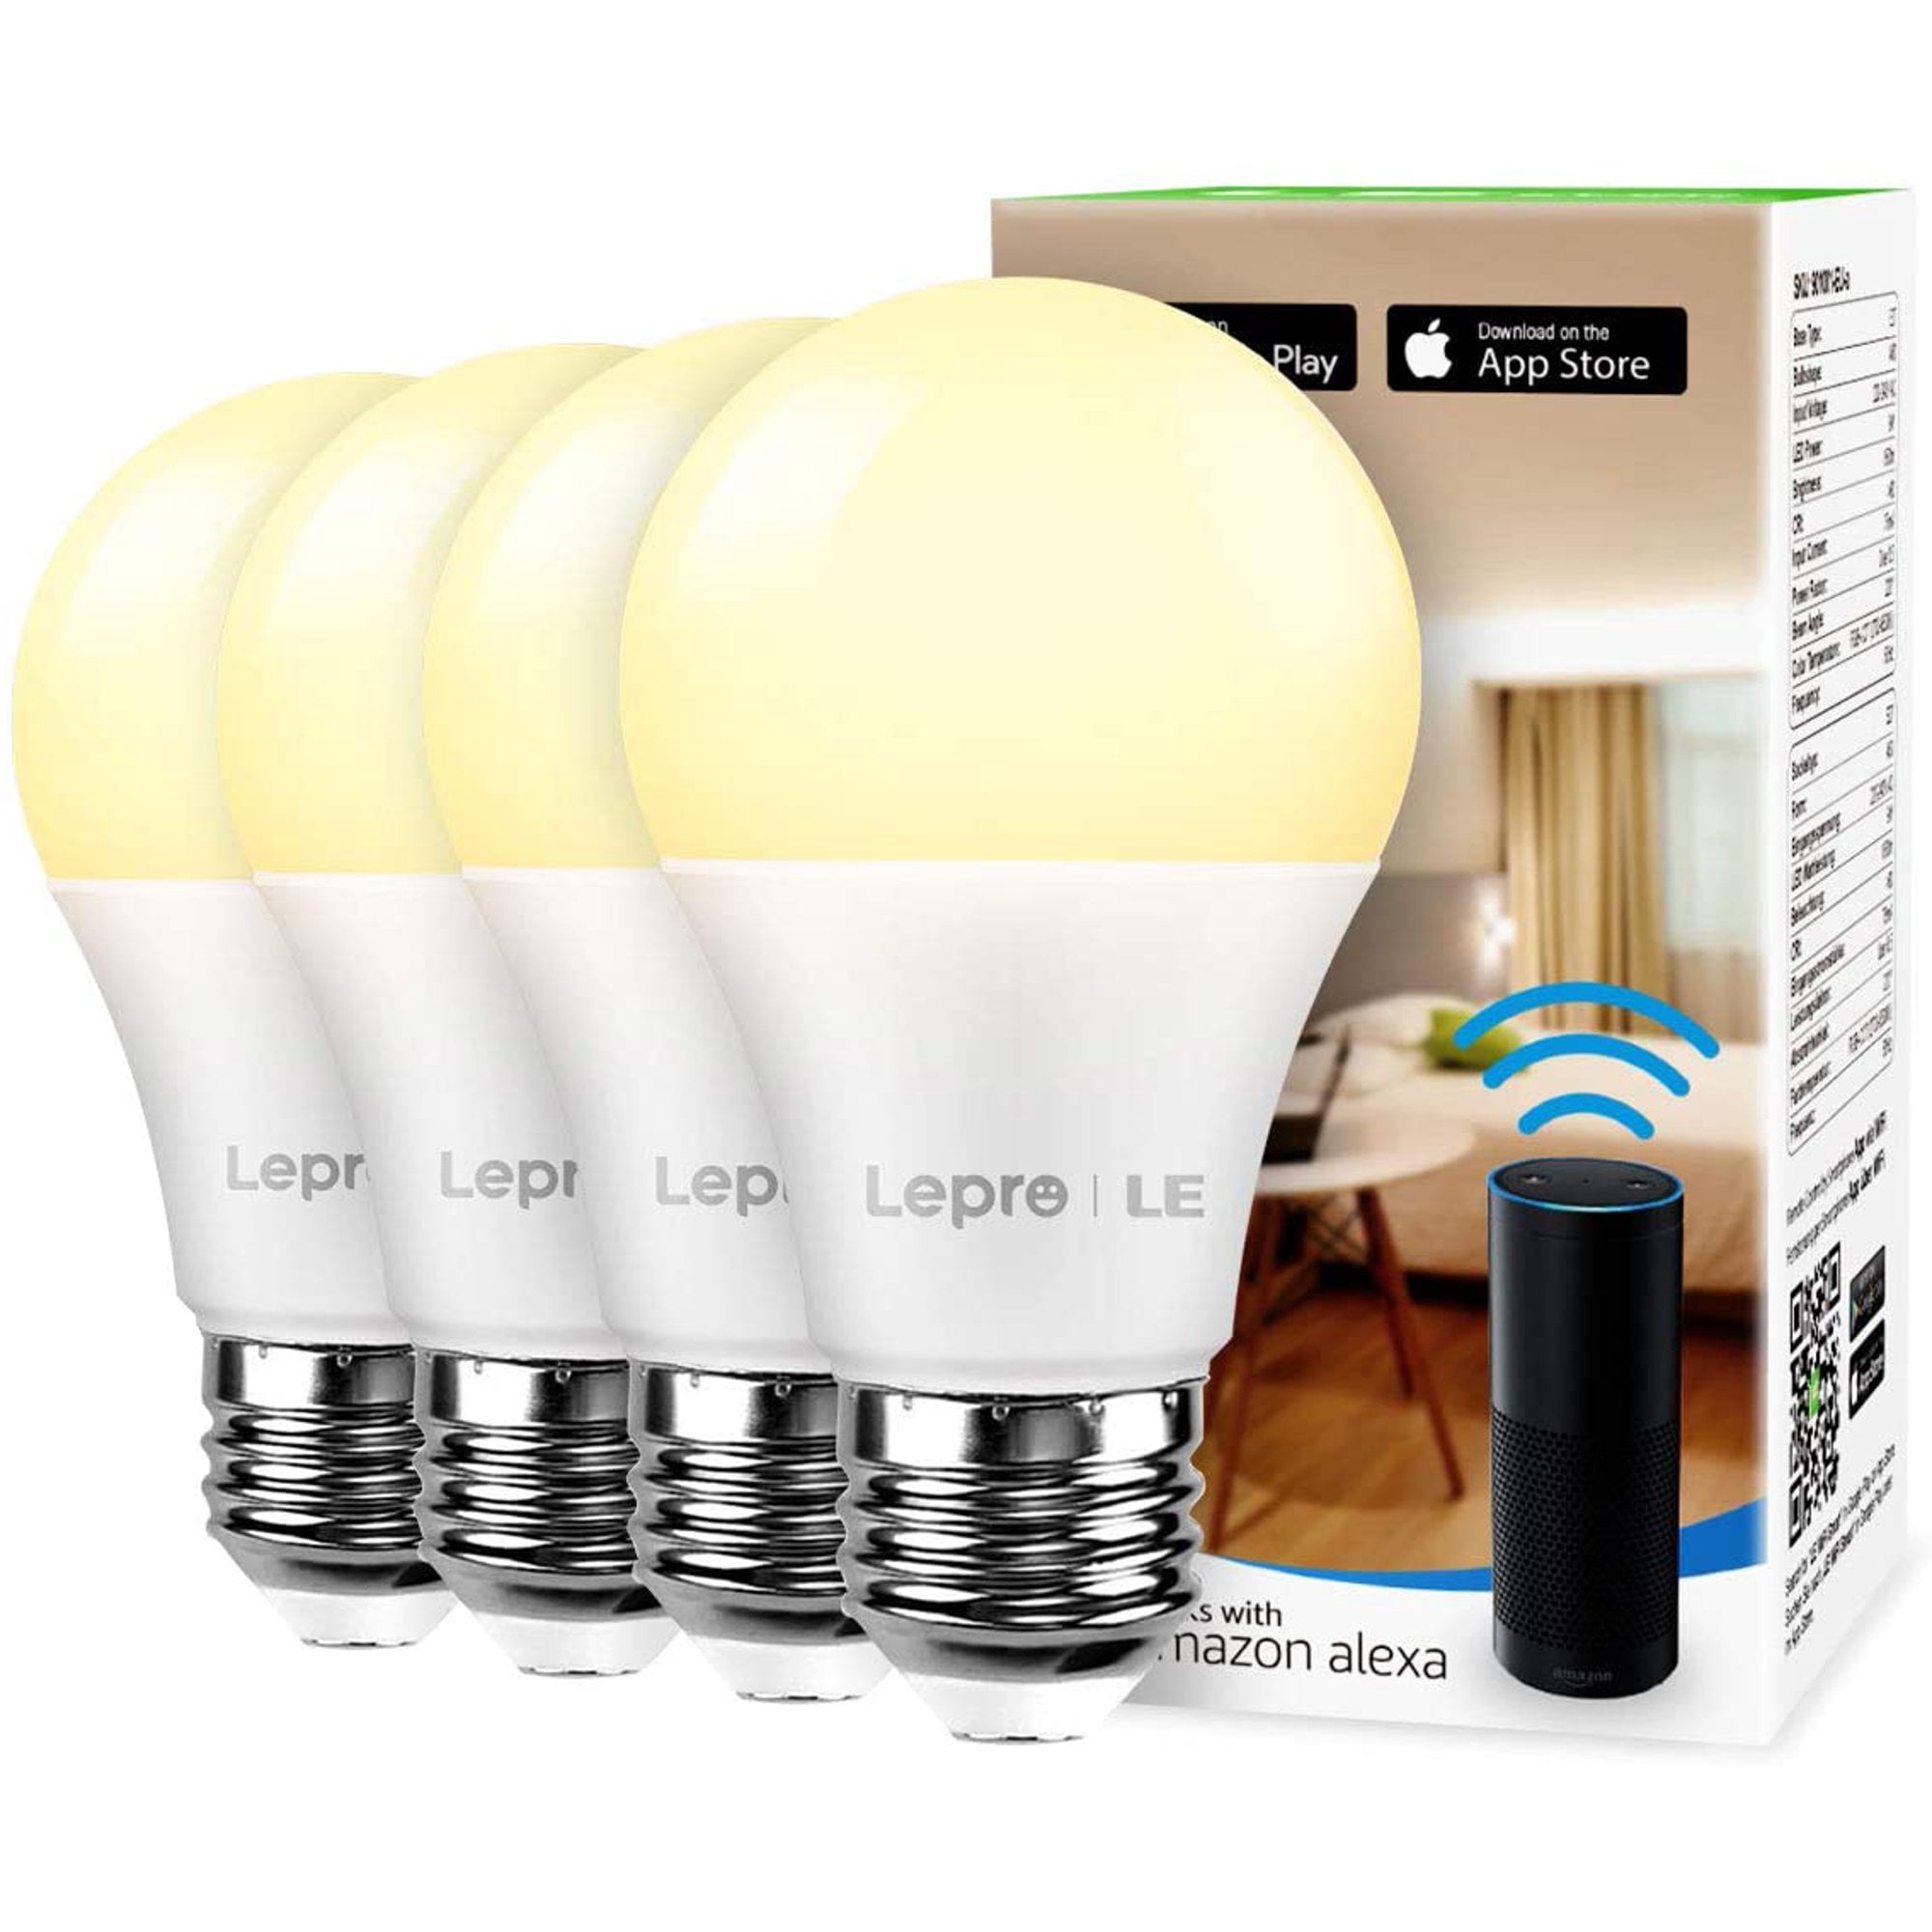 Lepro Smart LED Warm White 2700K, 60 Watt Equivalent, Dimmable with App, Alexa and Google Home Compatible, Hub Required, A19 E26, 2.4GHz WiFi, Pack of 4 - Walmart.com